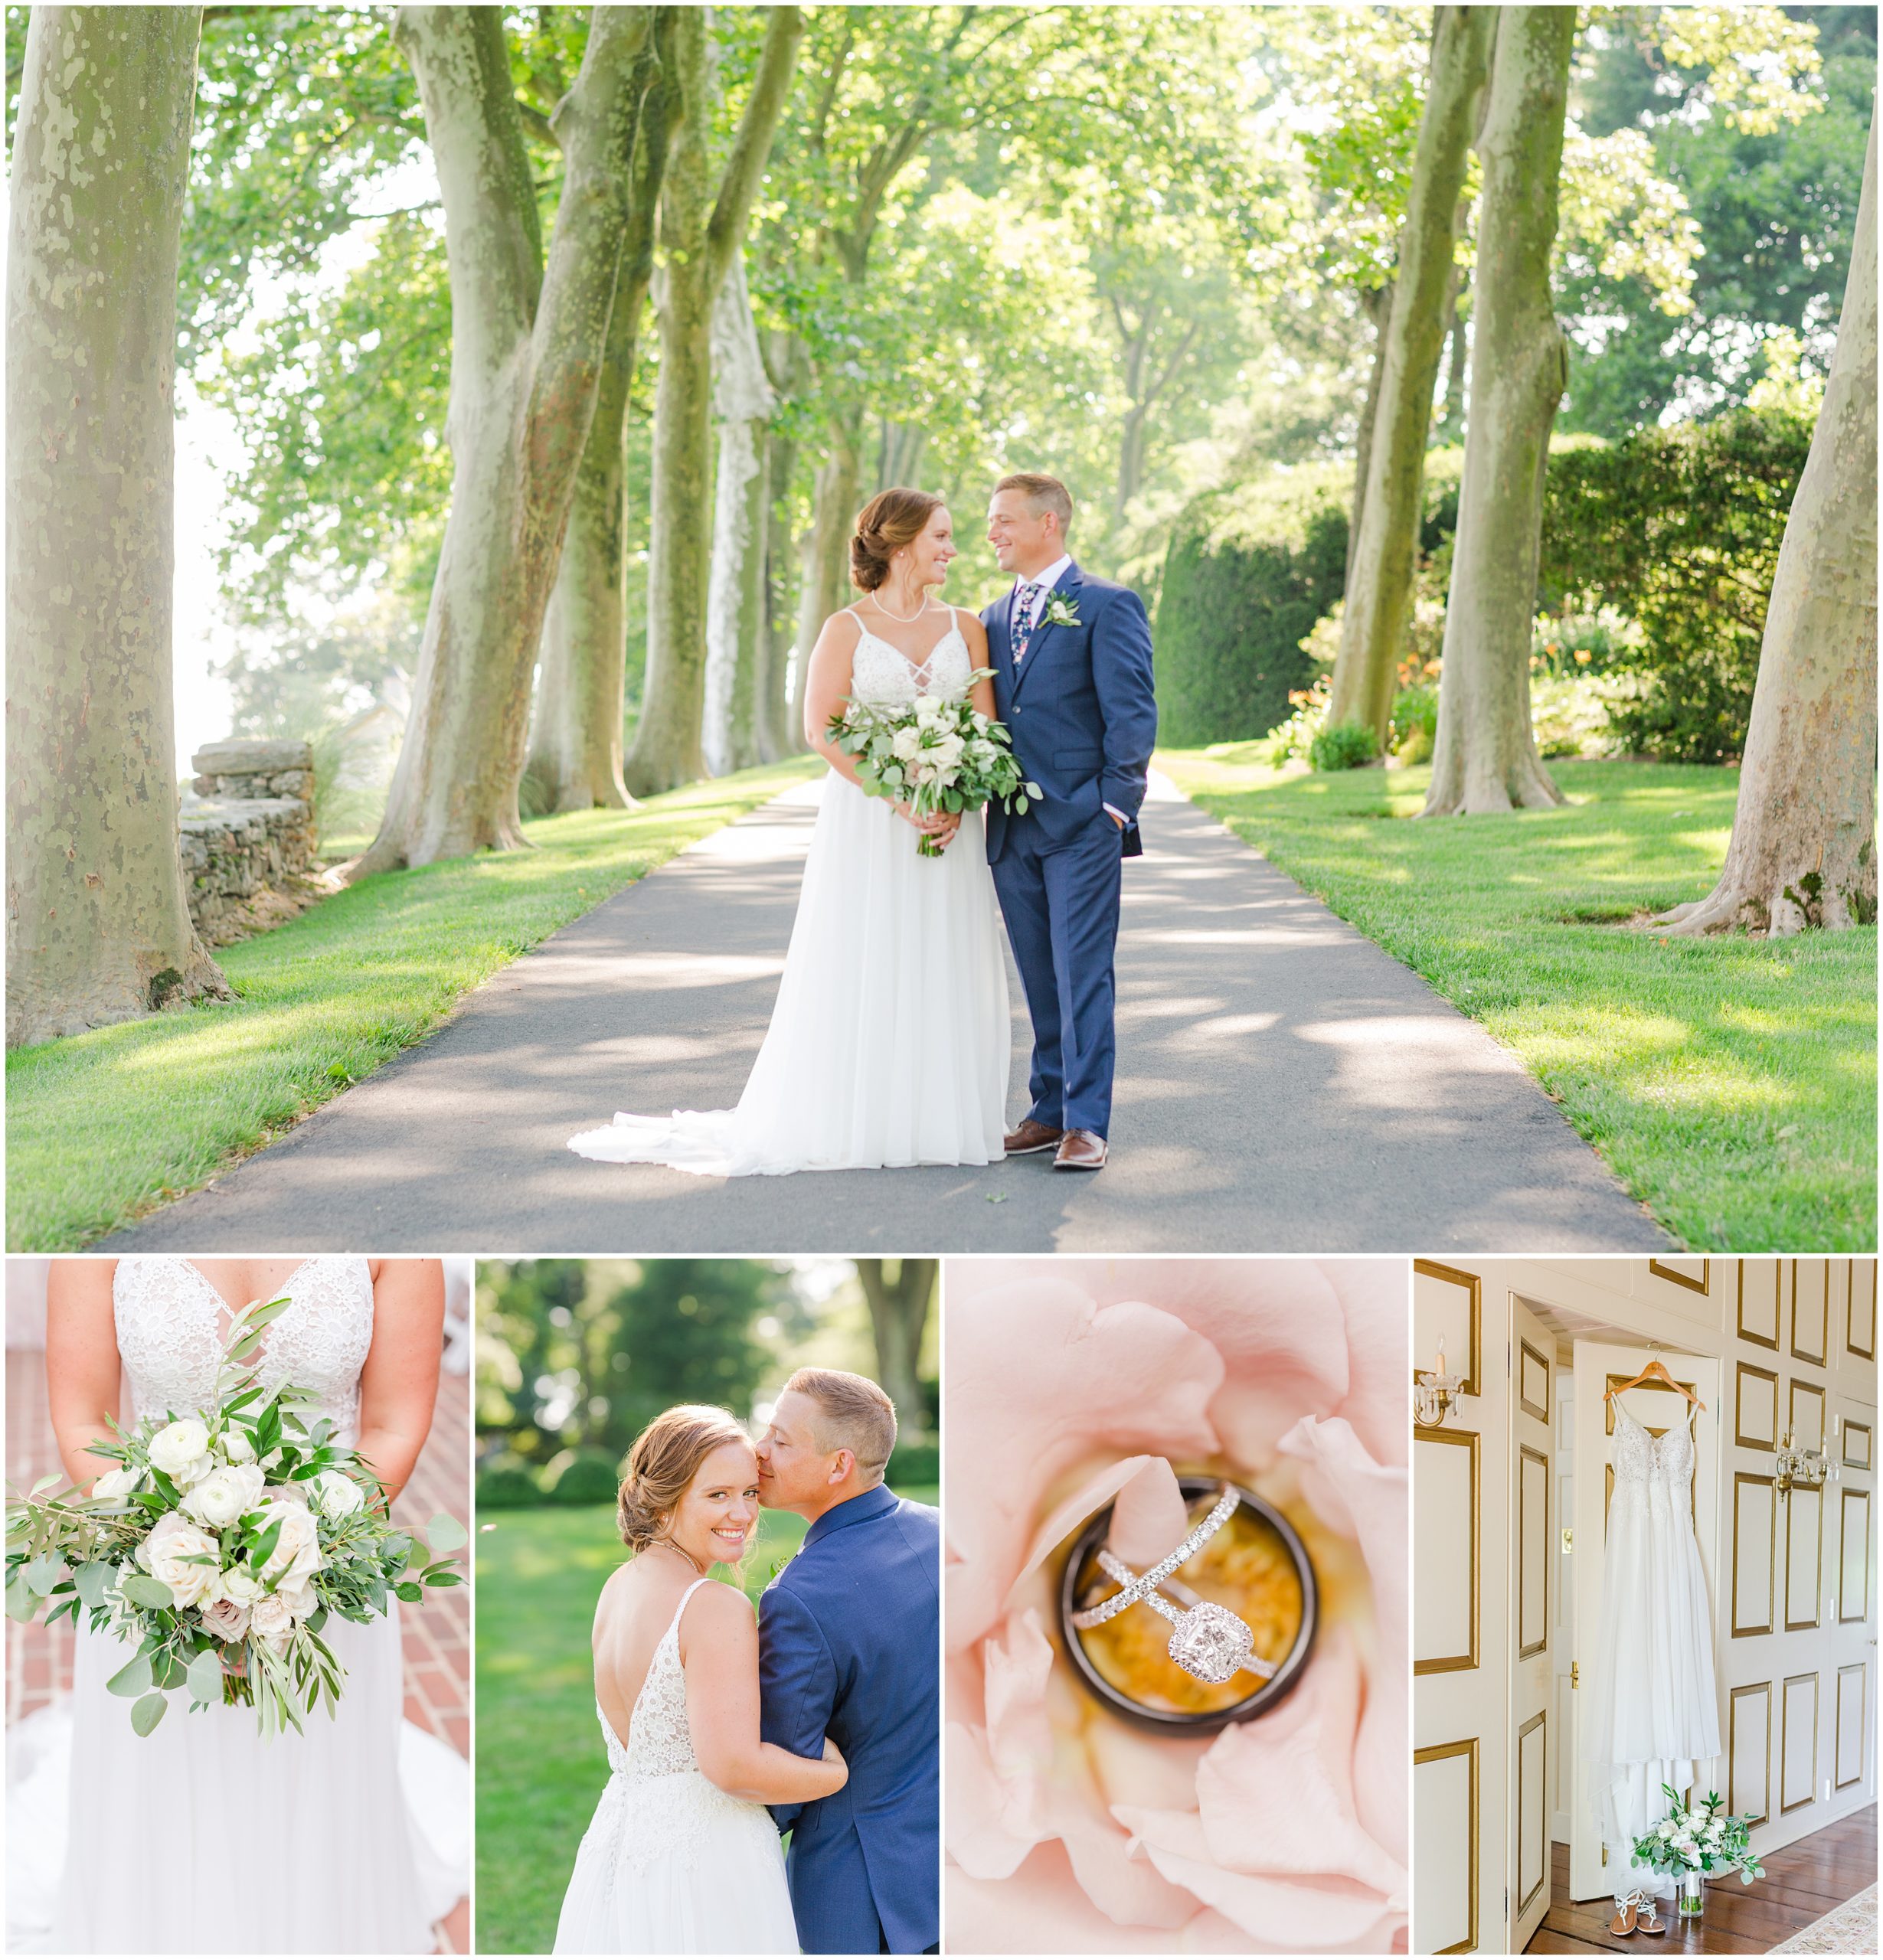 Romantic Drumore Estate Wedding in Pequea, PA photographed by Alexandra Mandato Photography